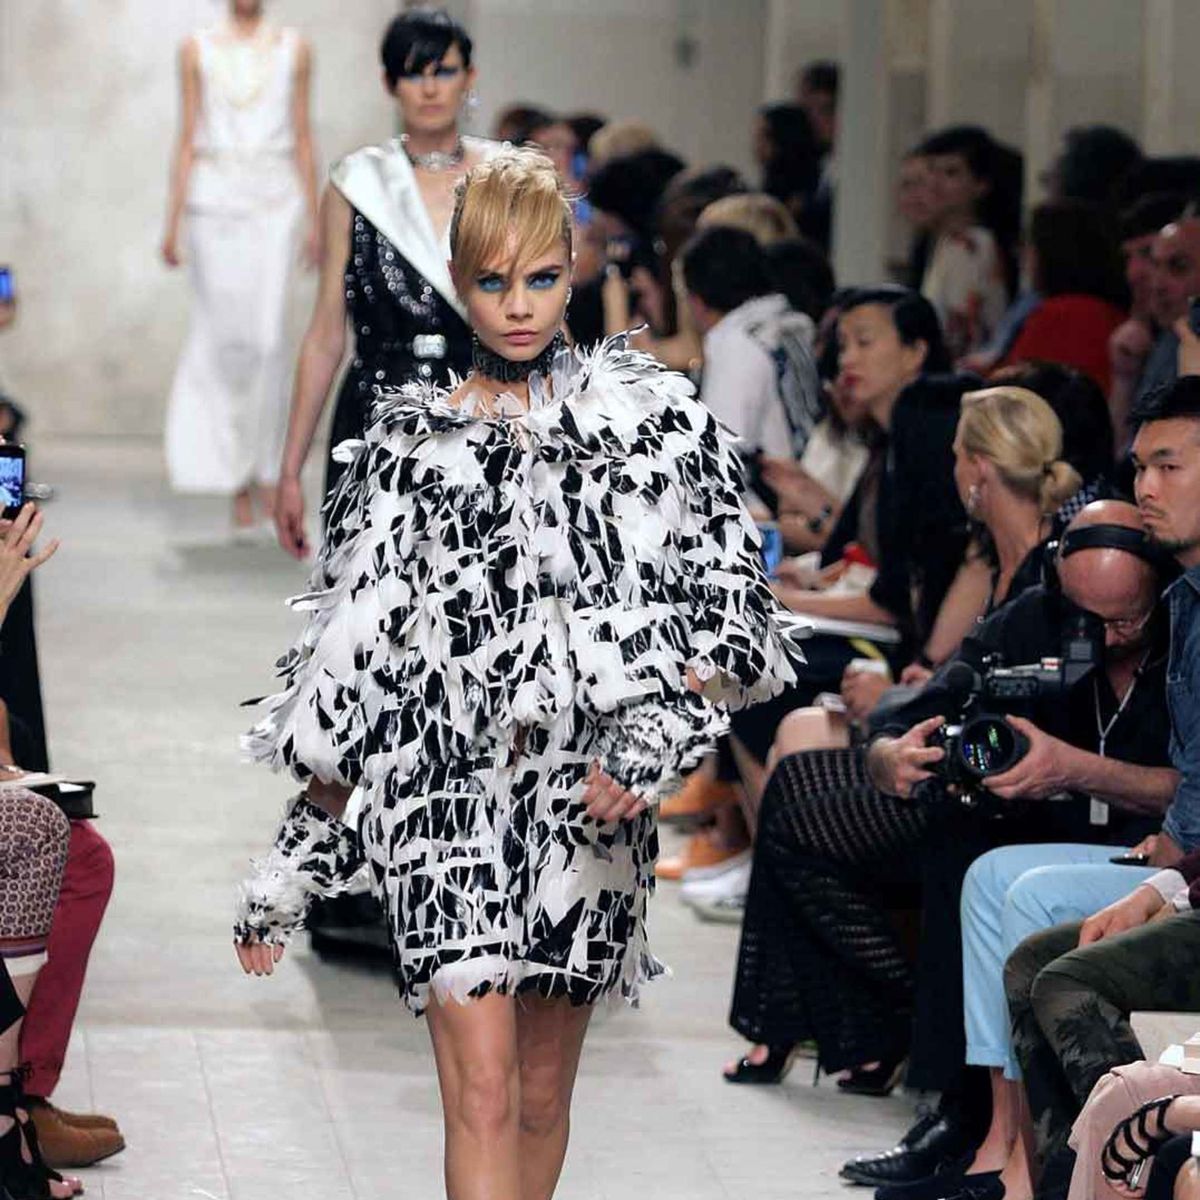 Chanel's 2014-2015 Cruise collection revealed